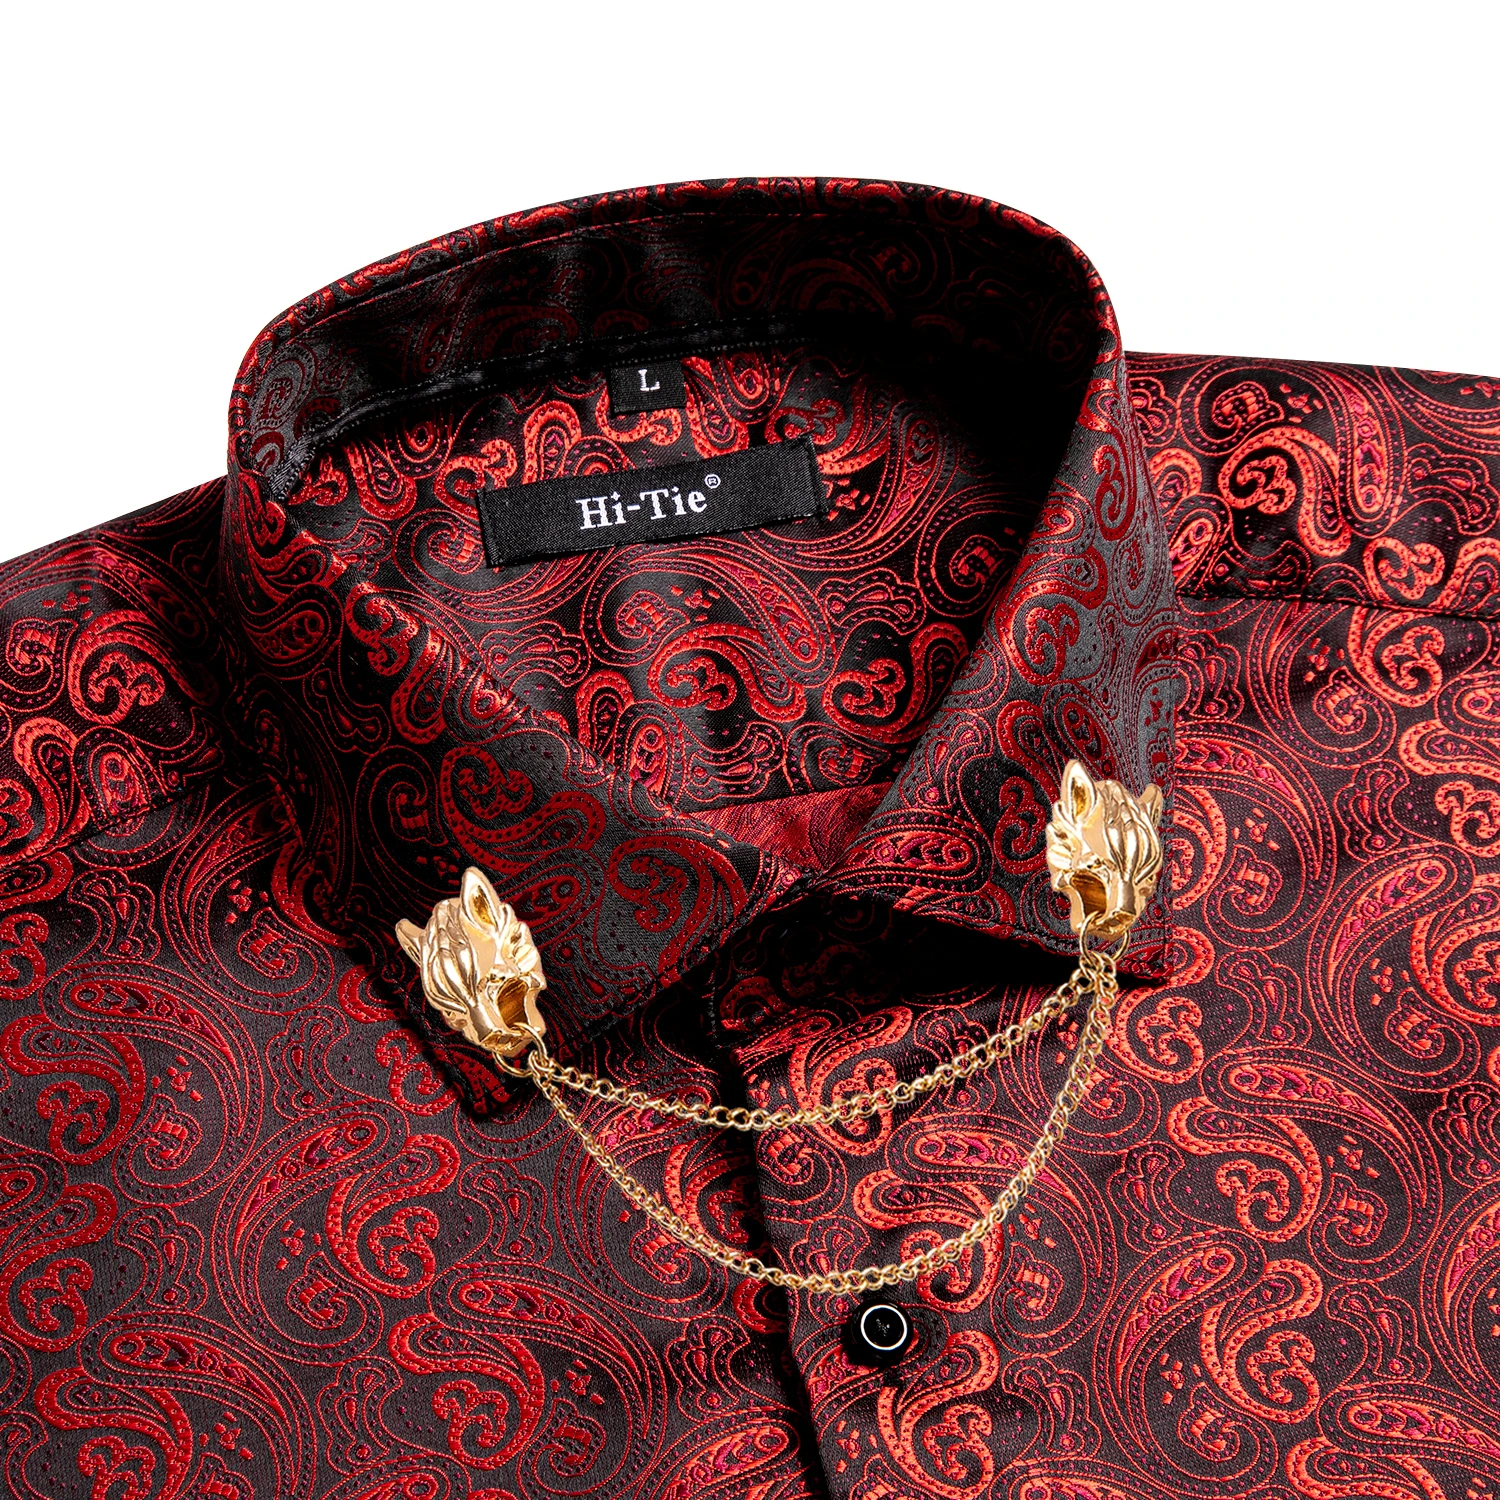 Hi-Tie Red Silk Mens Shirts Classic Paisley Lapel Long Sleeve Slim Fit High Quality Spring Autumn Shirt Male Business Party Gift